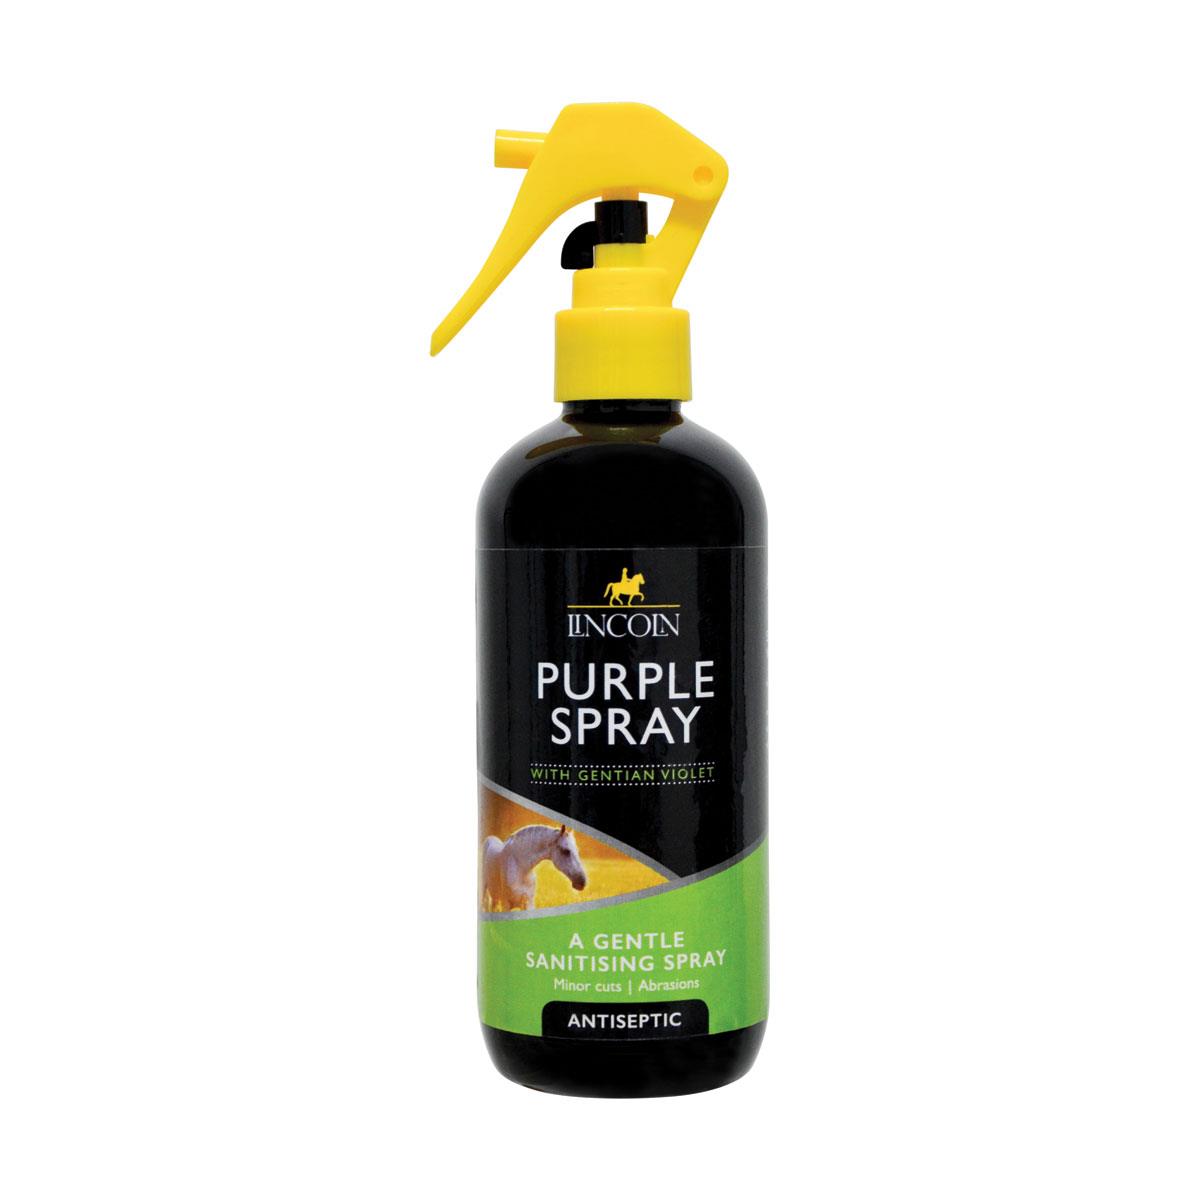 Lincoln Purple Spray - A must-have antibacterial and antifungal spray for minor cuts and abrasions, ensuring your horse heals faster with a non-sting formula.